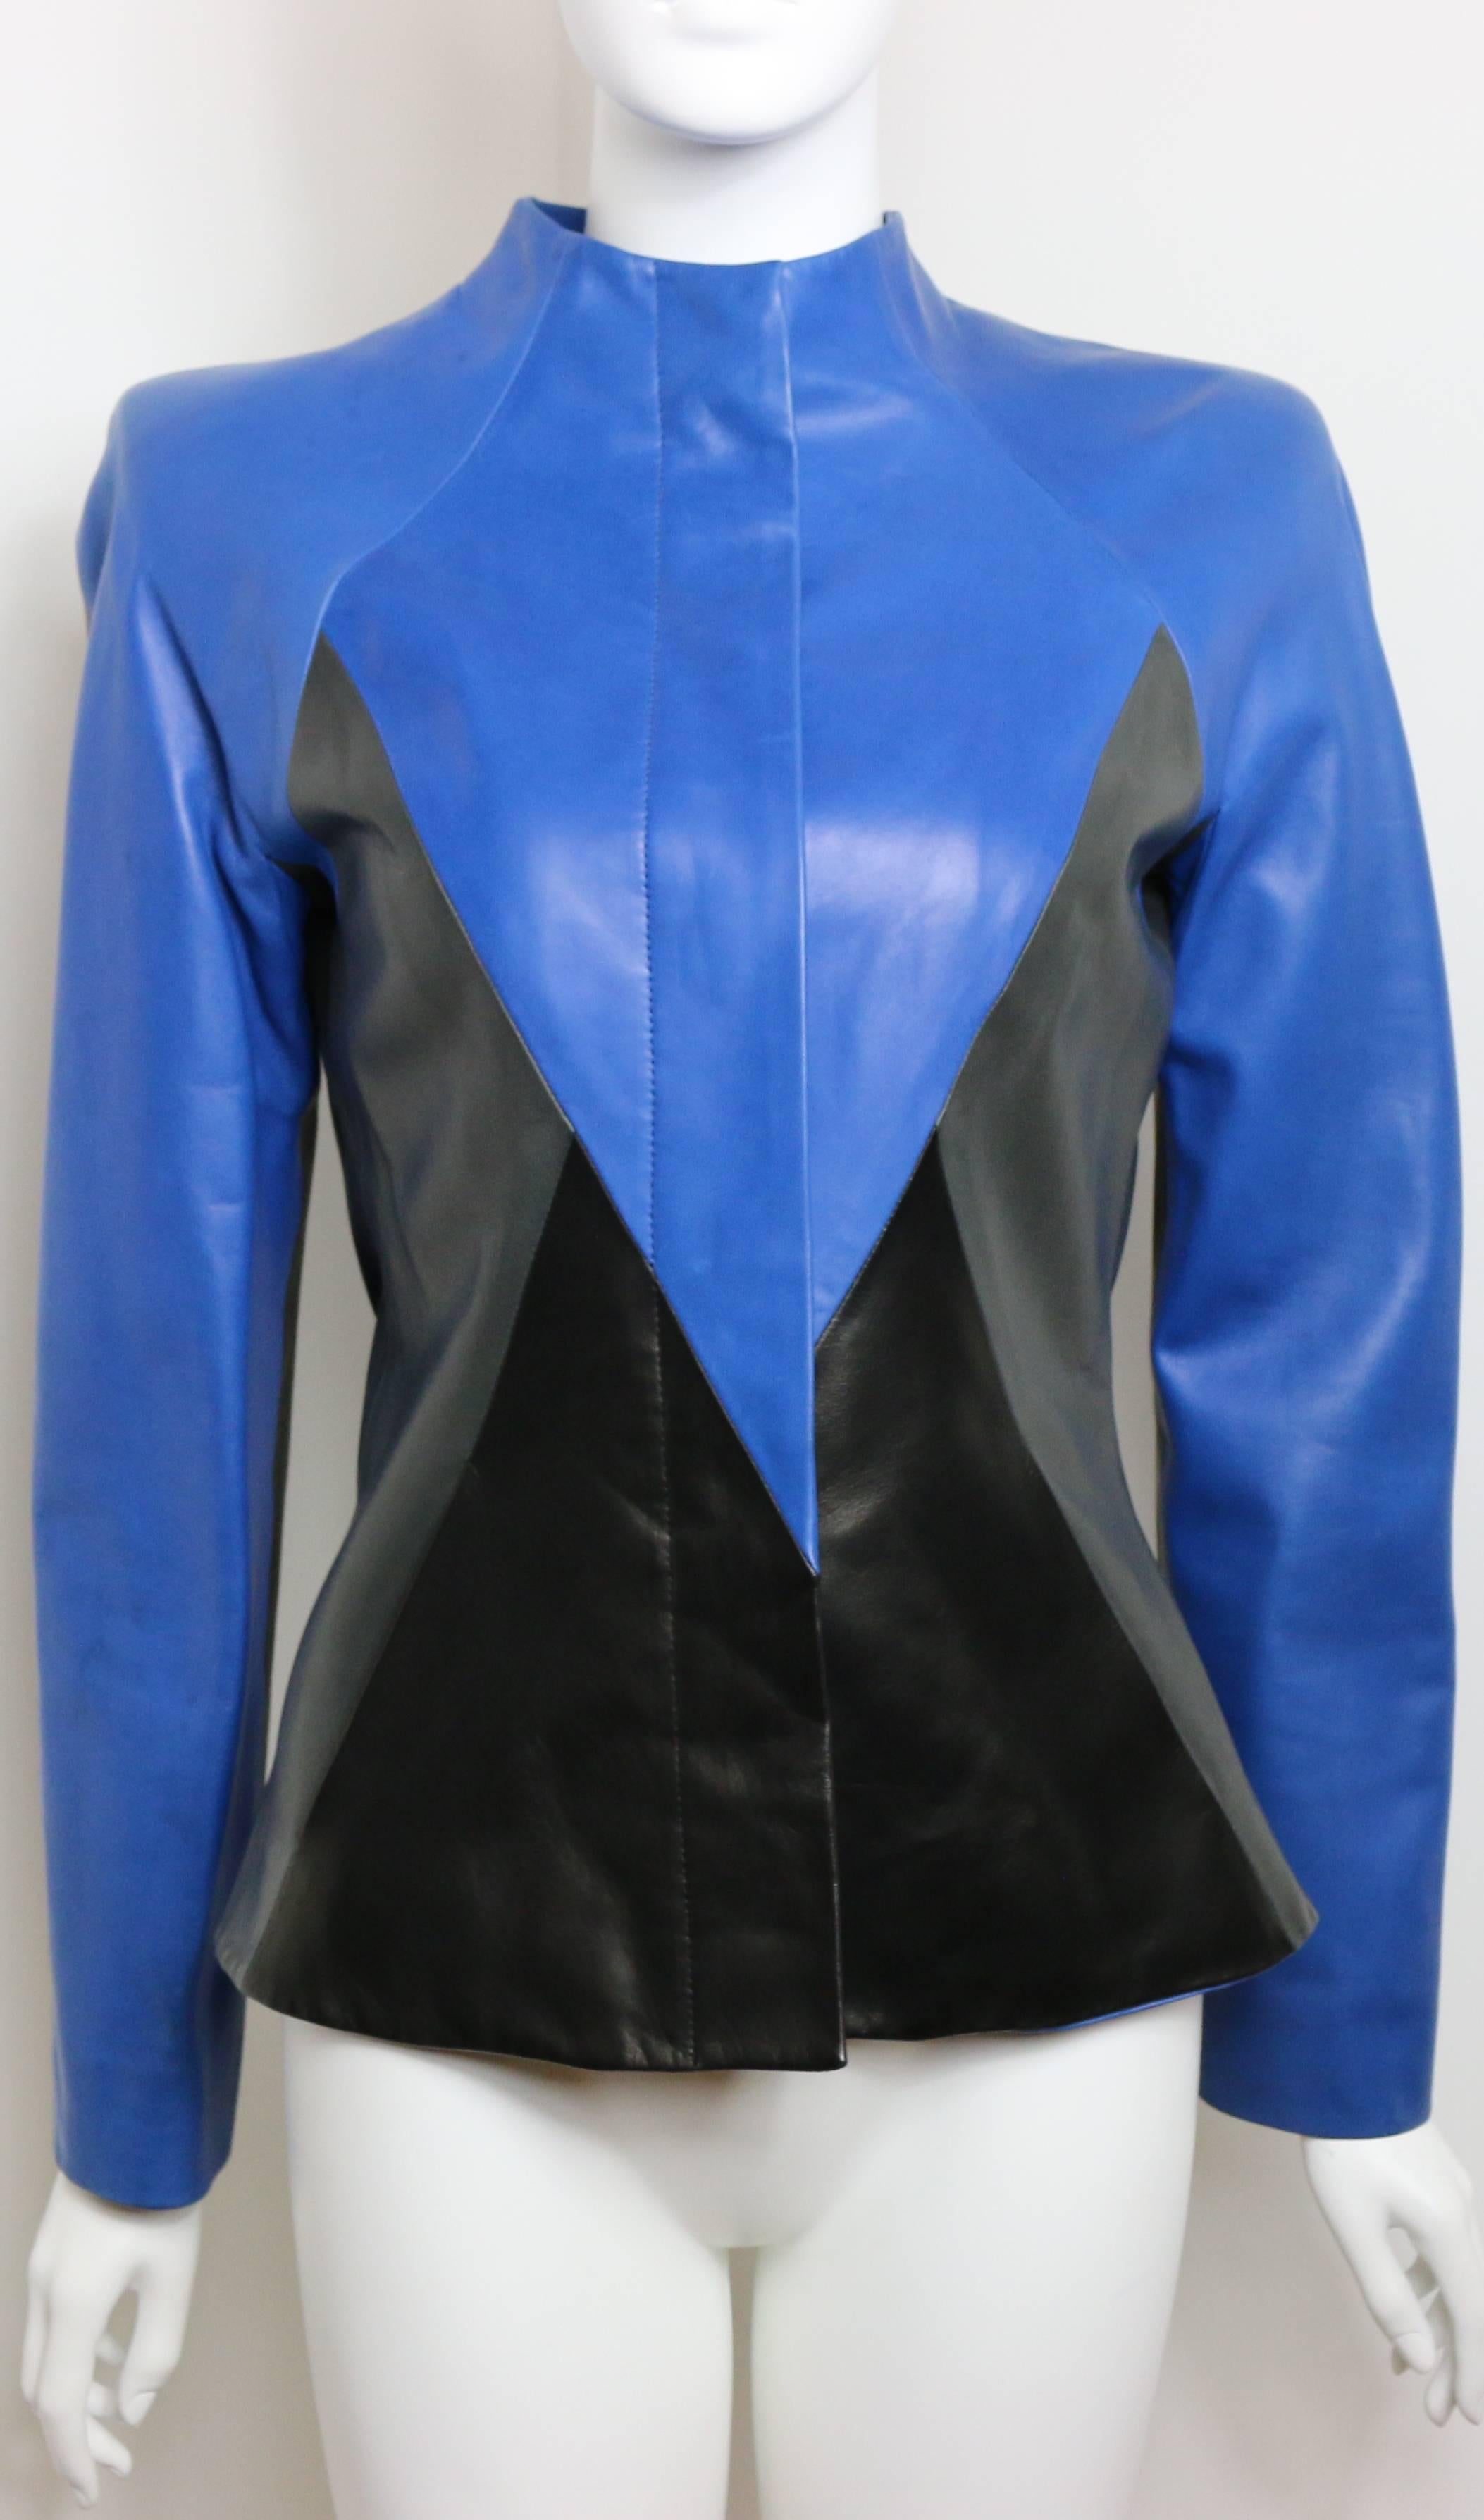 - Vintage 90s Givenchy by Alexander McQueen  blue/black/grey colour blocked geometric shoulder padded leather jacket. This is one of a kind leather jacket!

- Five hidden front panel buttons in blue.   

- Two side pockets. 

- Made in France.

-